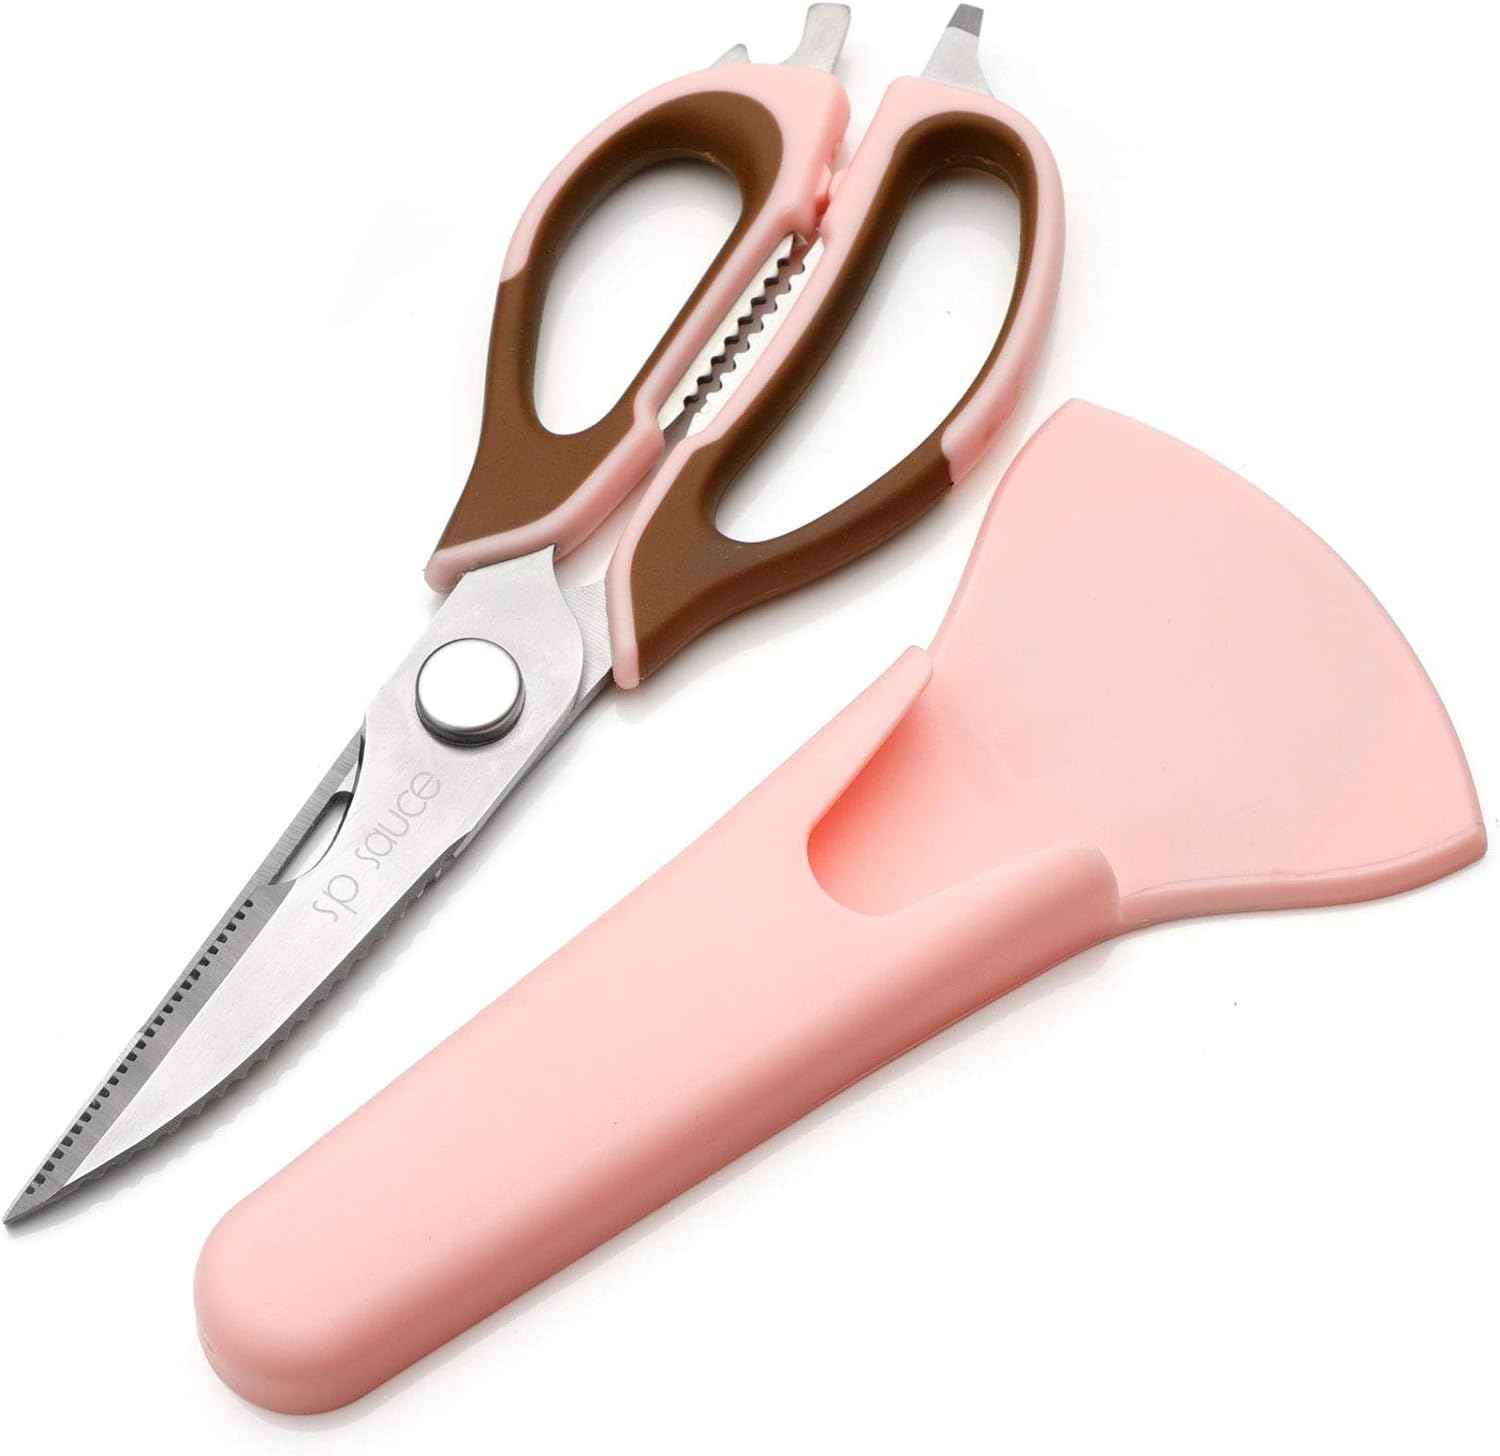 ODMILY Left Handed Kitchen Scissors Review